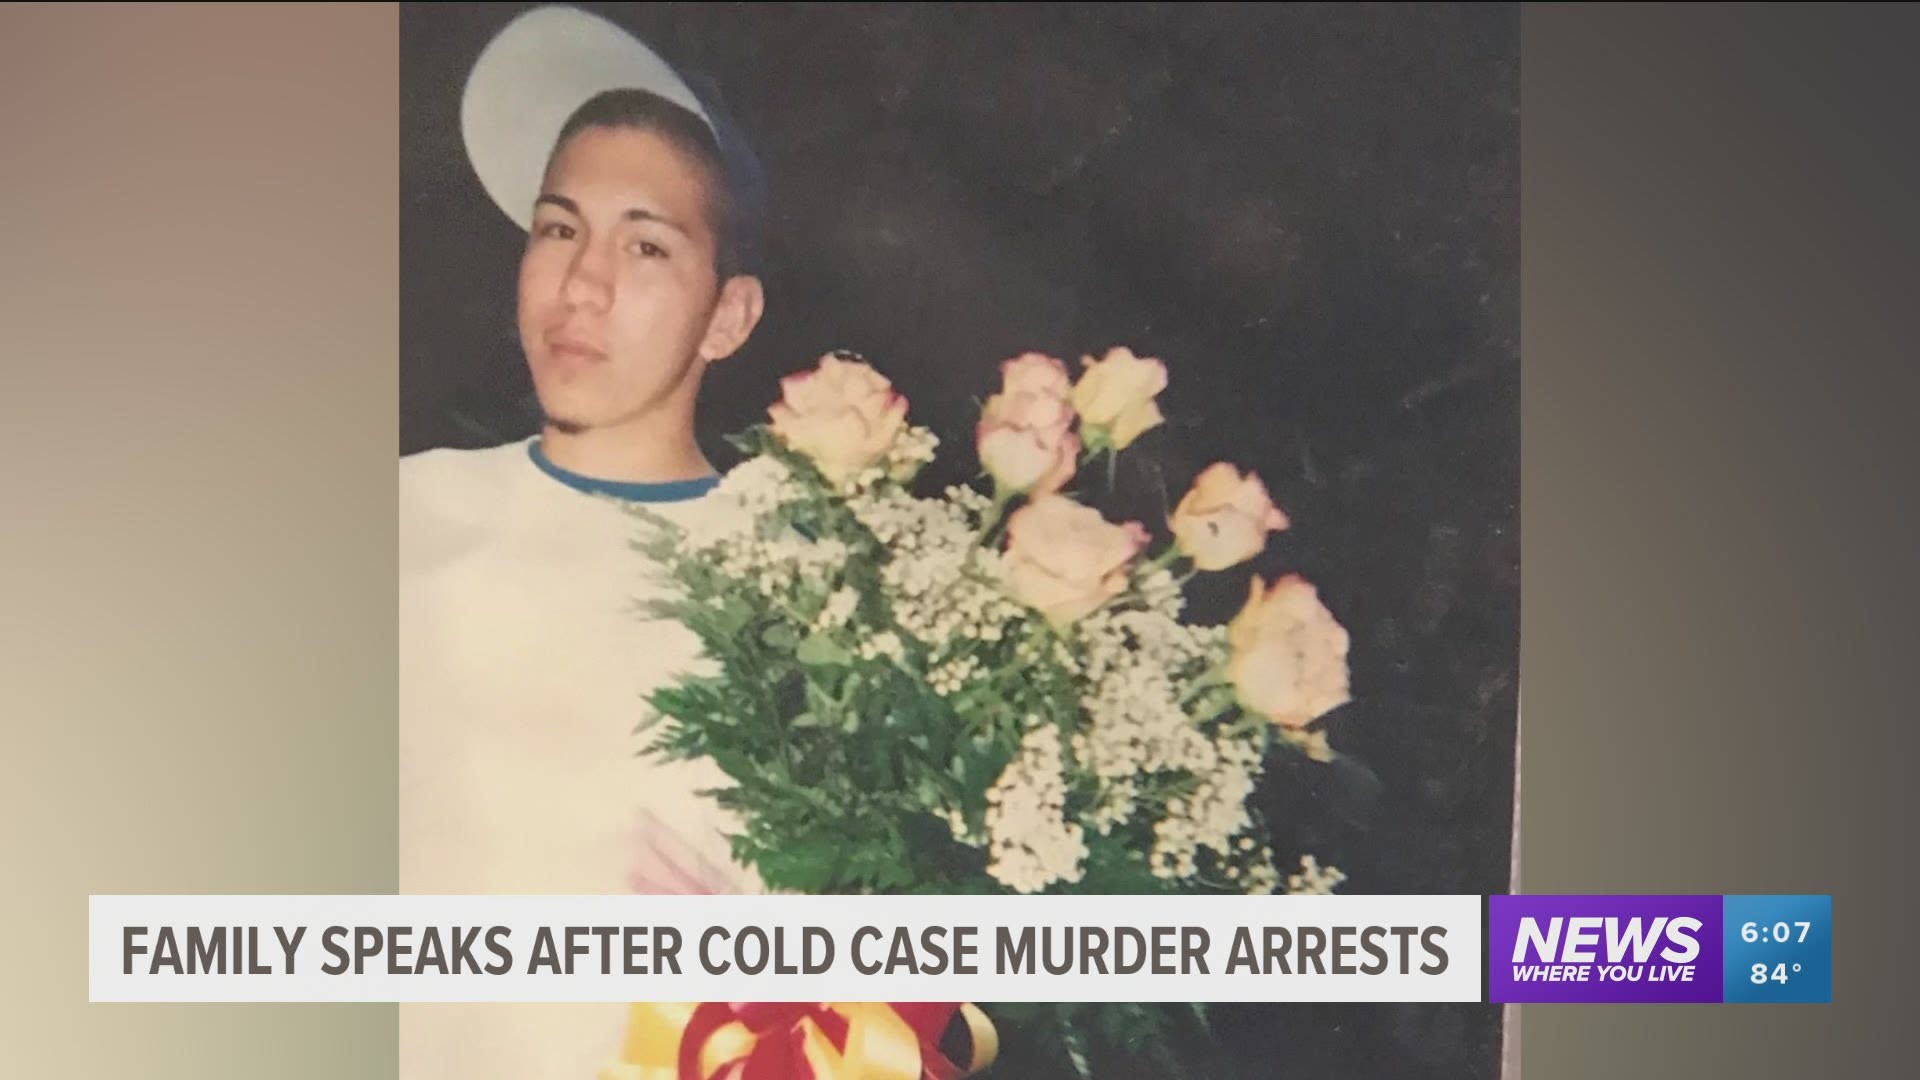 The family of cold case victim Adelio Romero was shocked to hear the suspects had finally been arrested. https://bit.ly/2DuyvMM